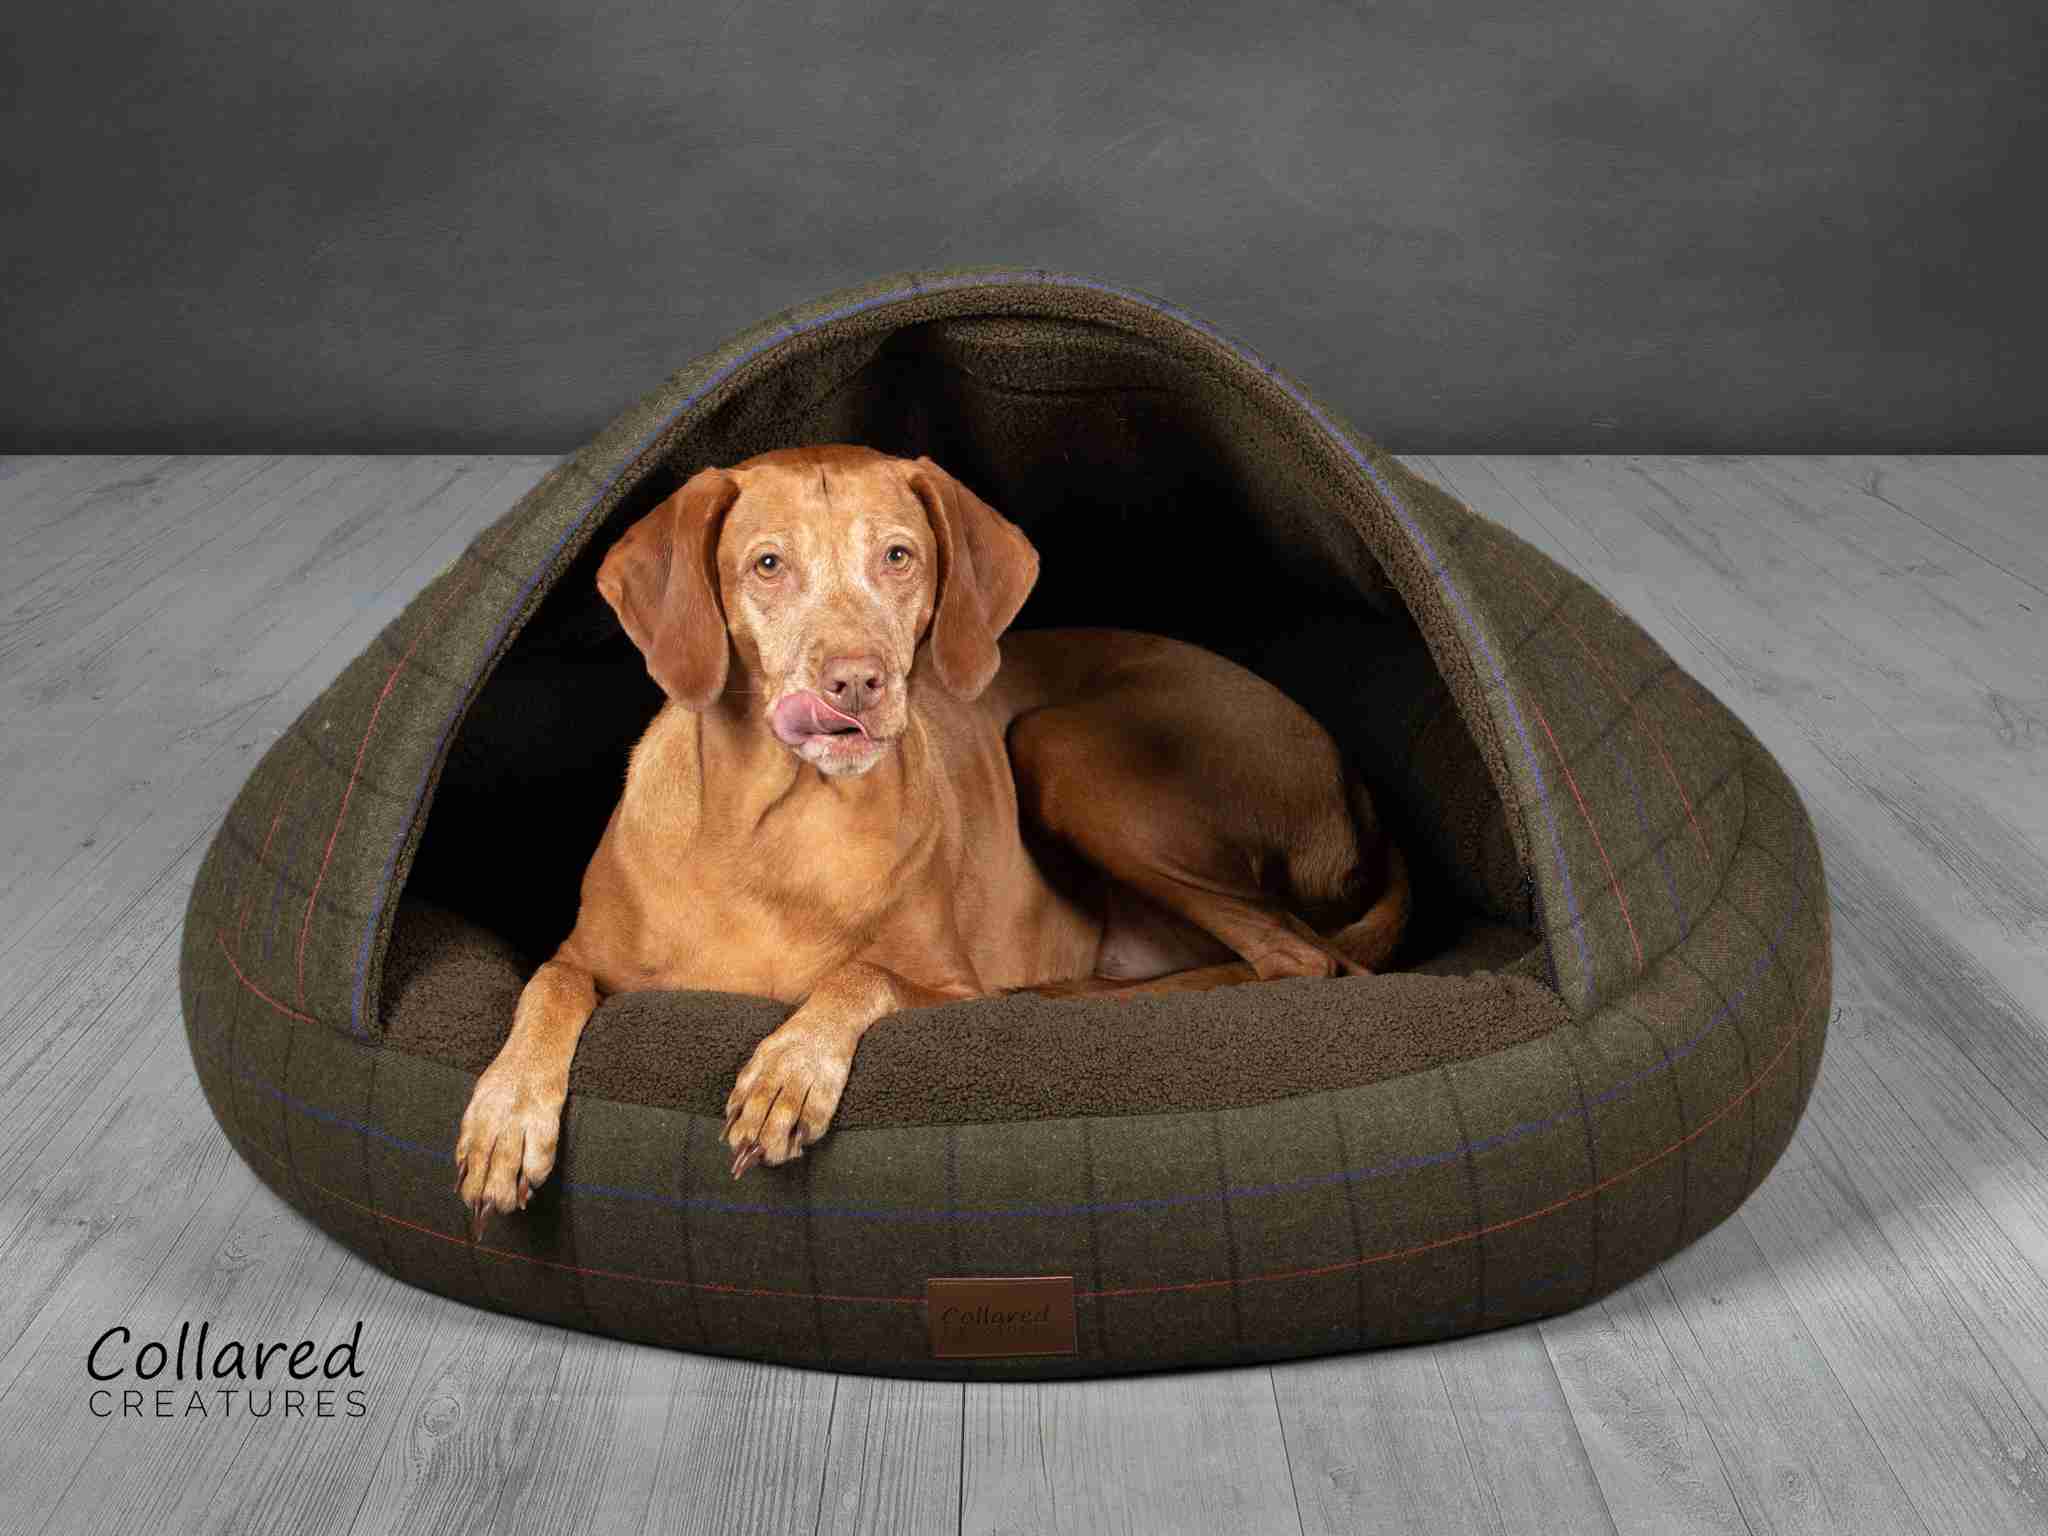 Collared Creatures Green Tweed Deluxe Comfort Cocoon Dog Cave Bed large